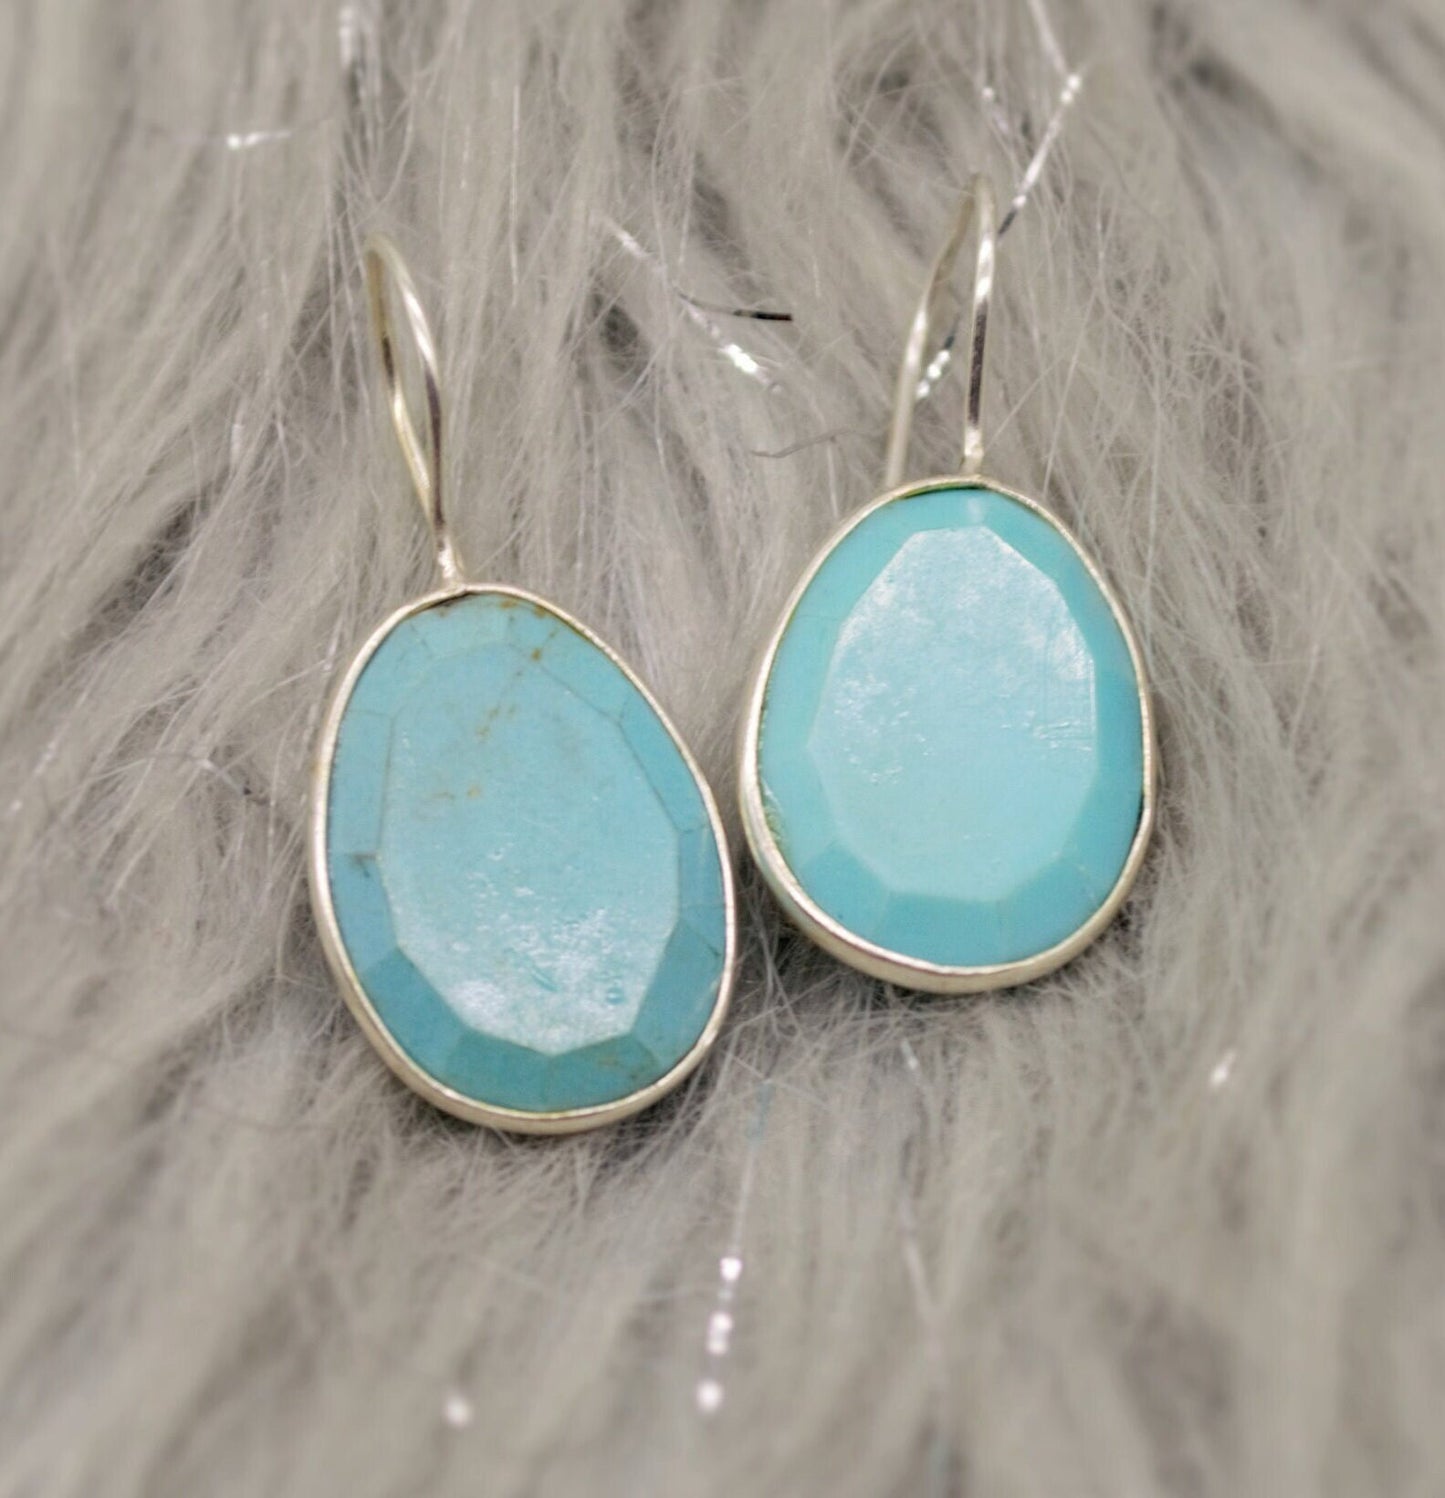 Blue Turquoise Silver Drop Earrings, Turquoise Jewelry, December Birthstone, Unique Gemstone, Sterling Silver Earrings, Birthday Gifts